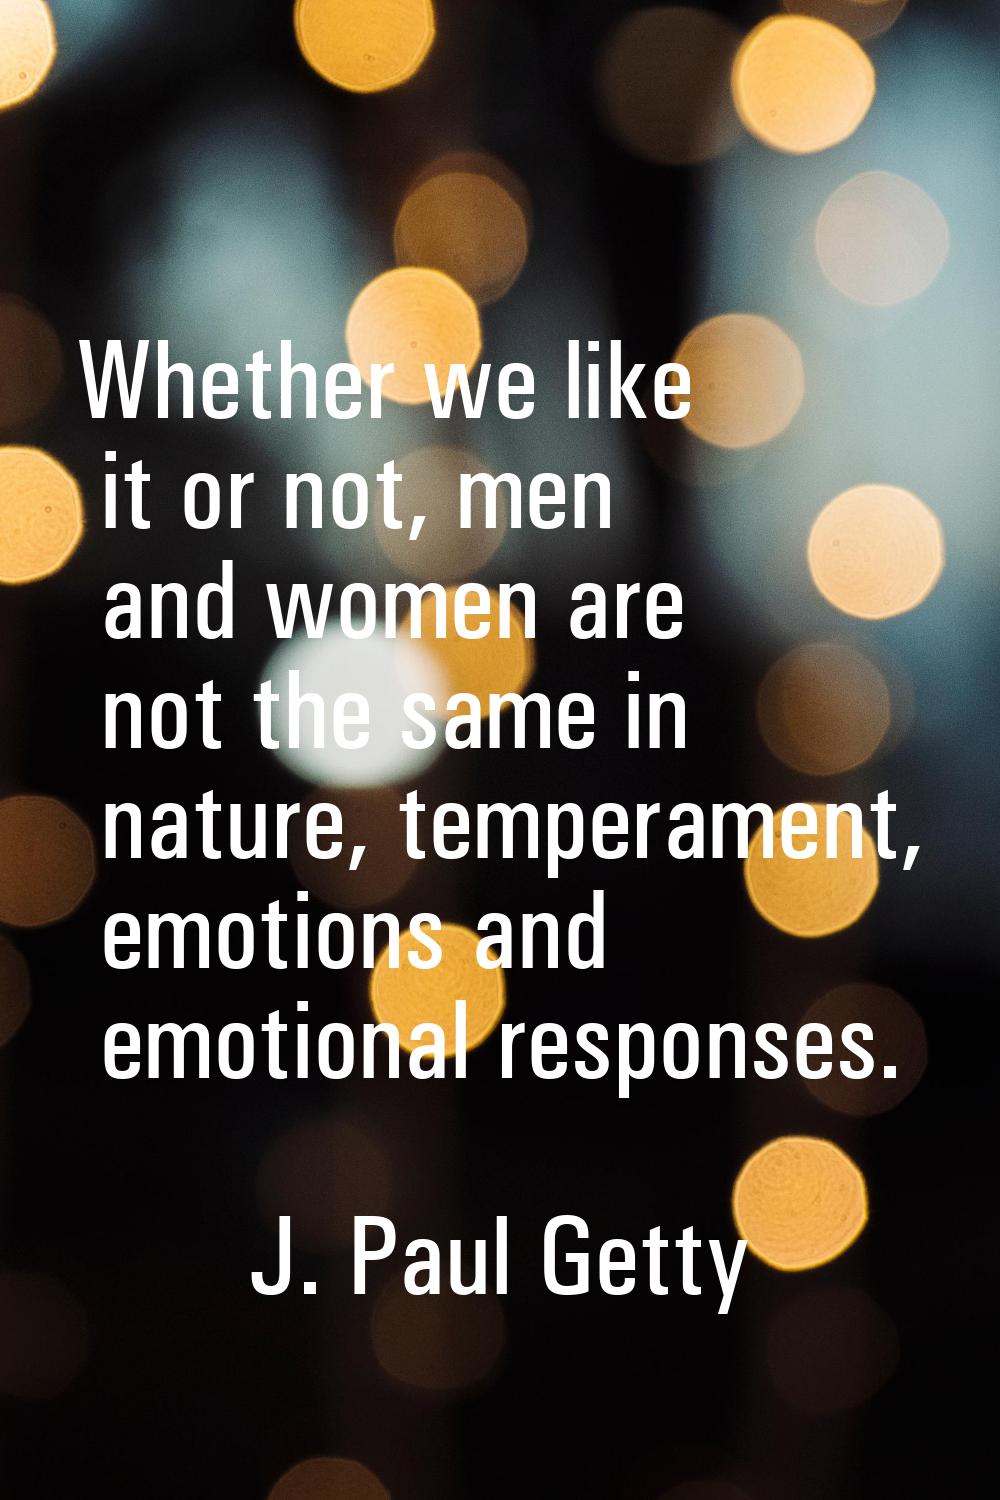 Whether we like it or not, men and women are not the same in nature, temperament, emotions and emot